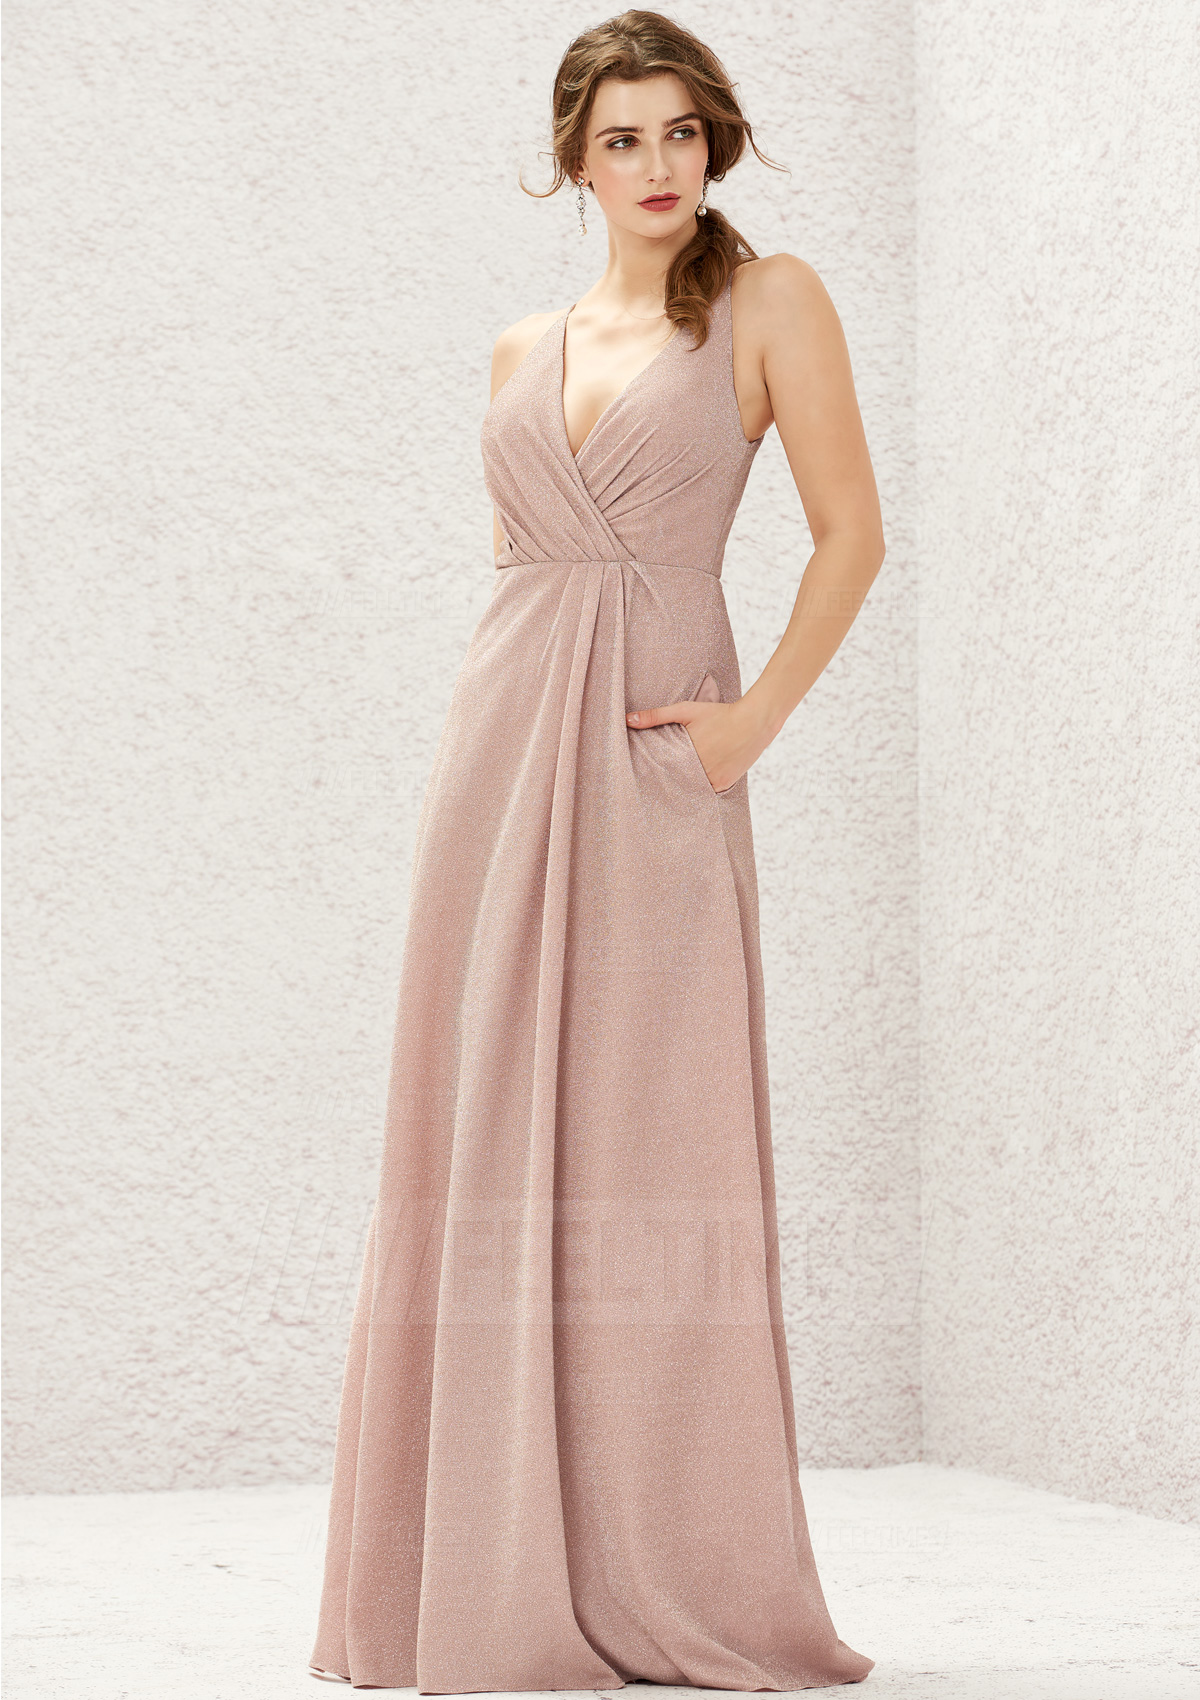 A-line/Princess Sleeveless Long/Floor-Length Metallic/Shimmer Jersey Bridesmaid Dress With Pleated
